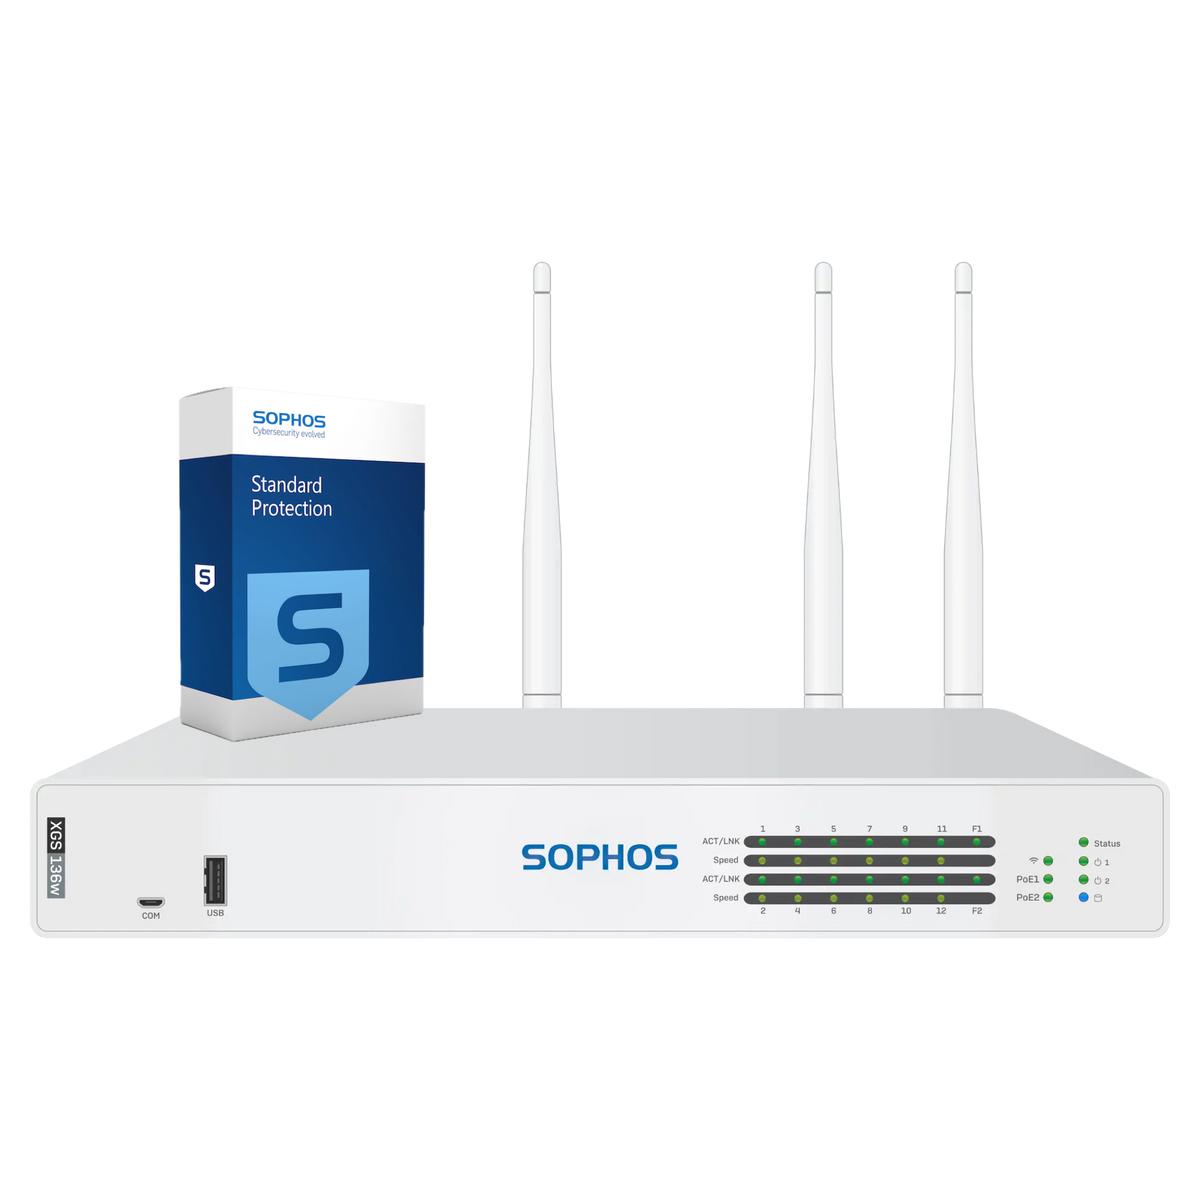 Sophos XGS 136w Firewall with Standard Protection, 3-year - EU power cord